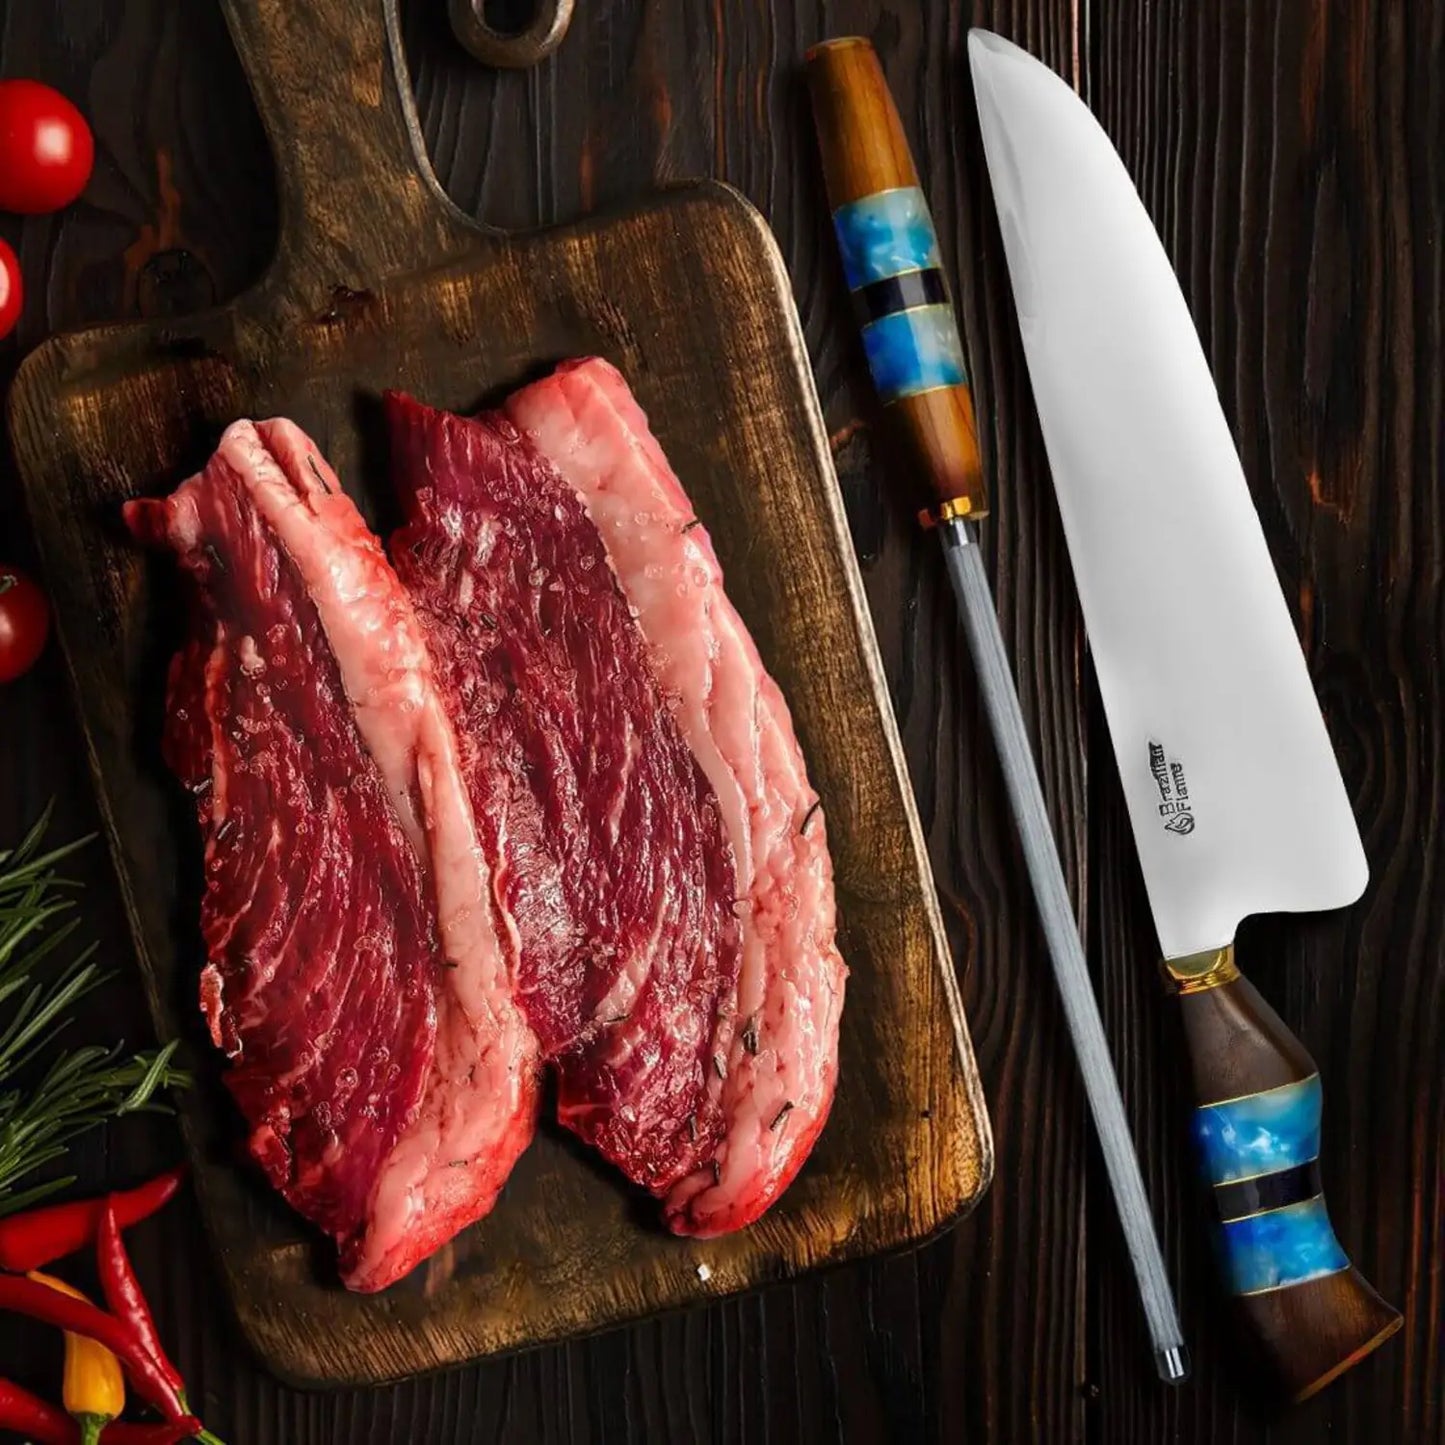 Brazilian Flame Chef's Knife - Picanha Set with Sharpener